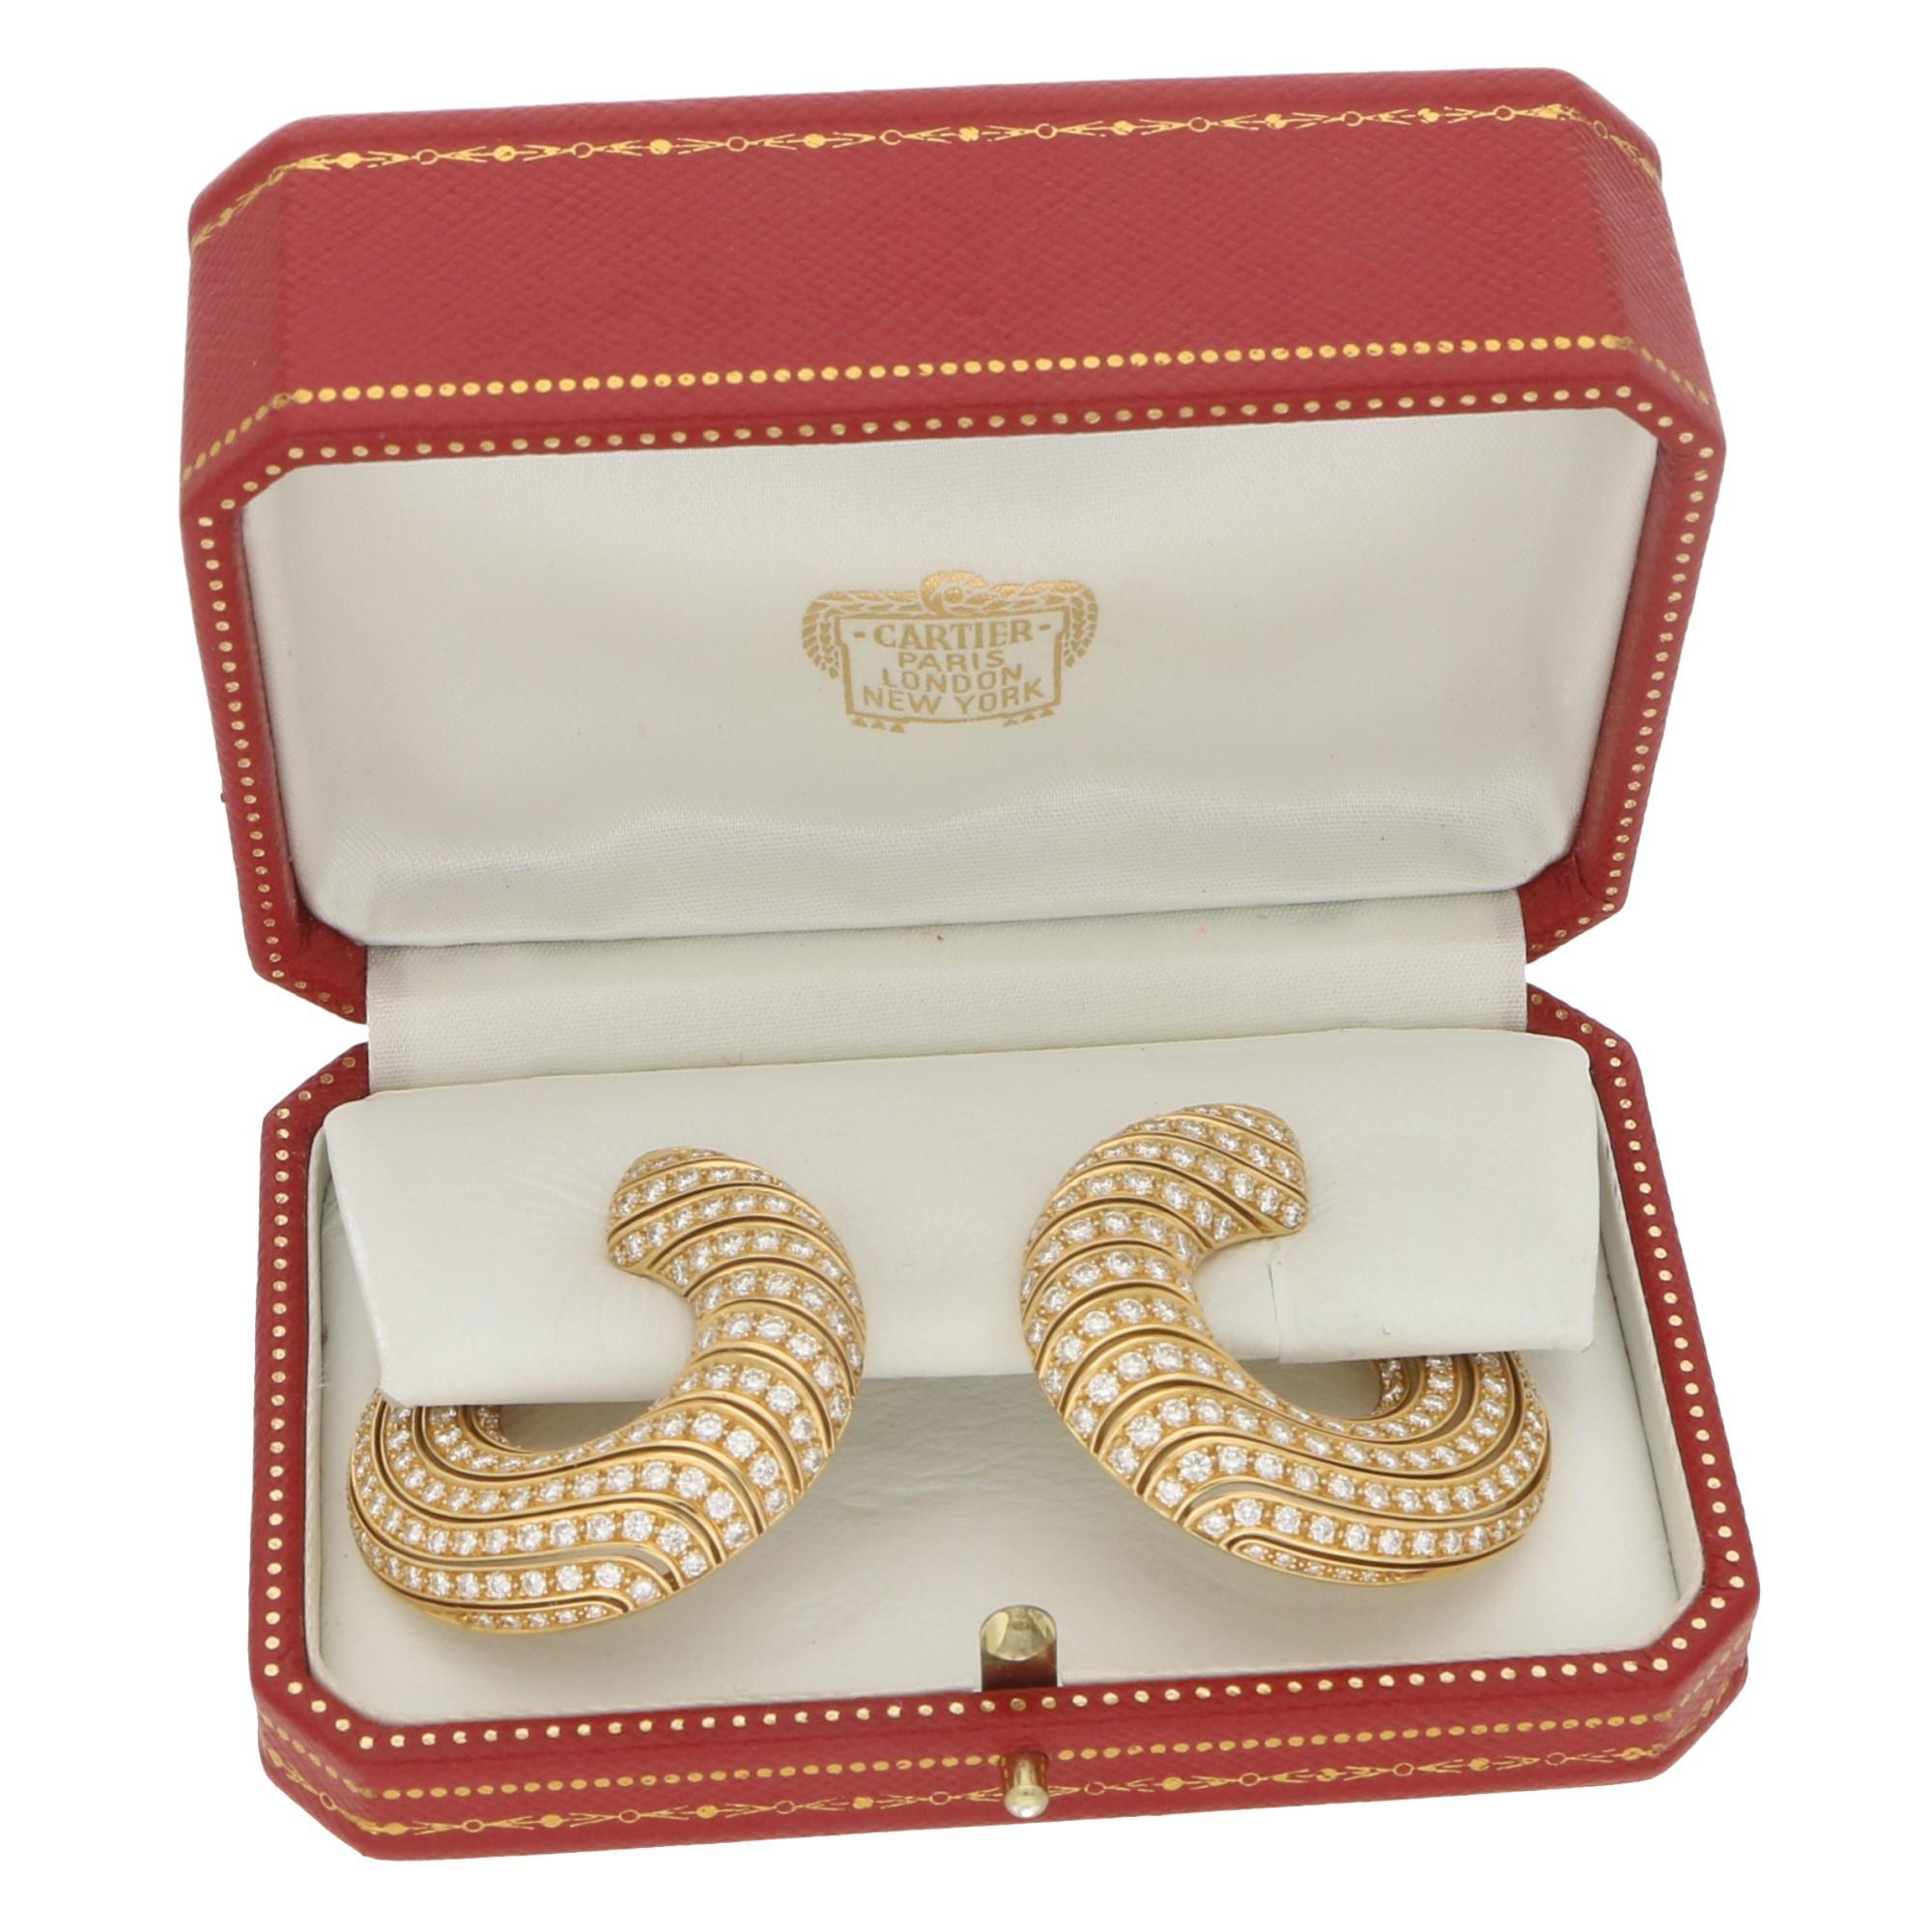 A rather beautiful pair of Cartier Neptune large vintage diamond side hoop earrings set in 18k yellow gold. 

Each earring is composed of 13 rows of waved round brilliant cut diamonds within a side hoop motif shape. Although a larger pair of hoops;